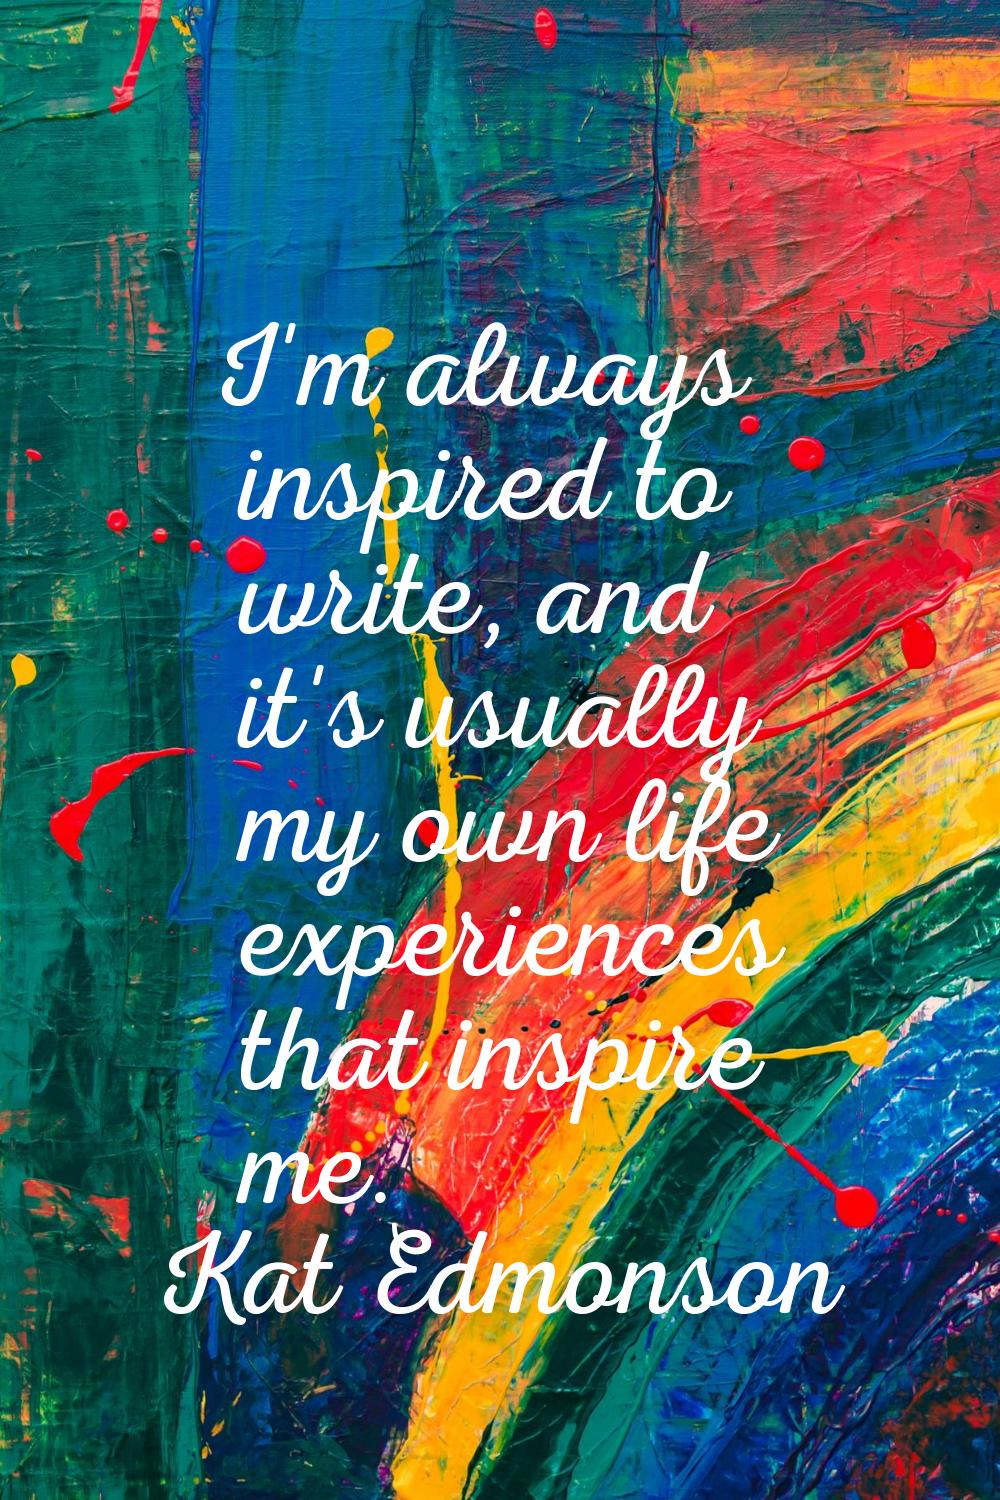 I'm always inspired to write, and it's usually my own life experiences that inspire me.